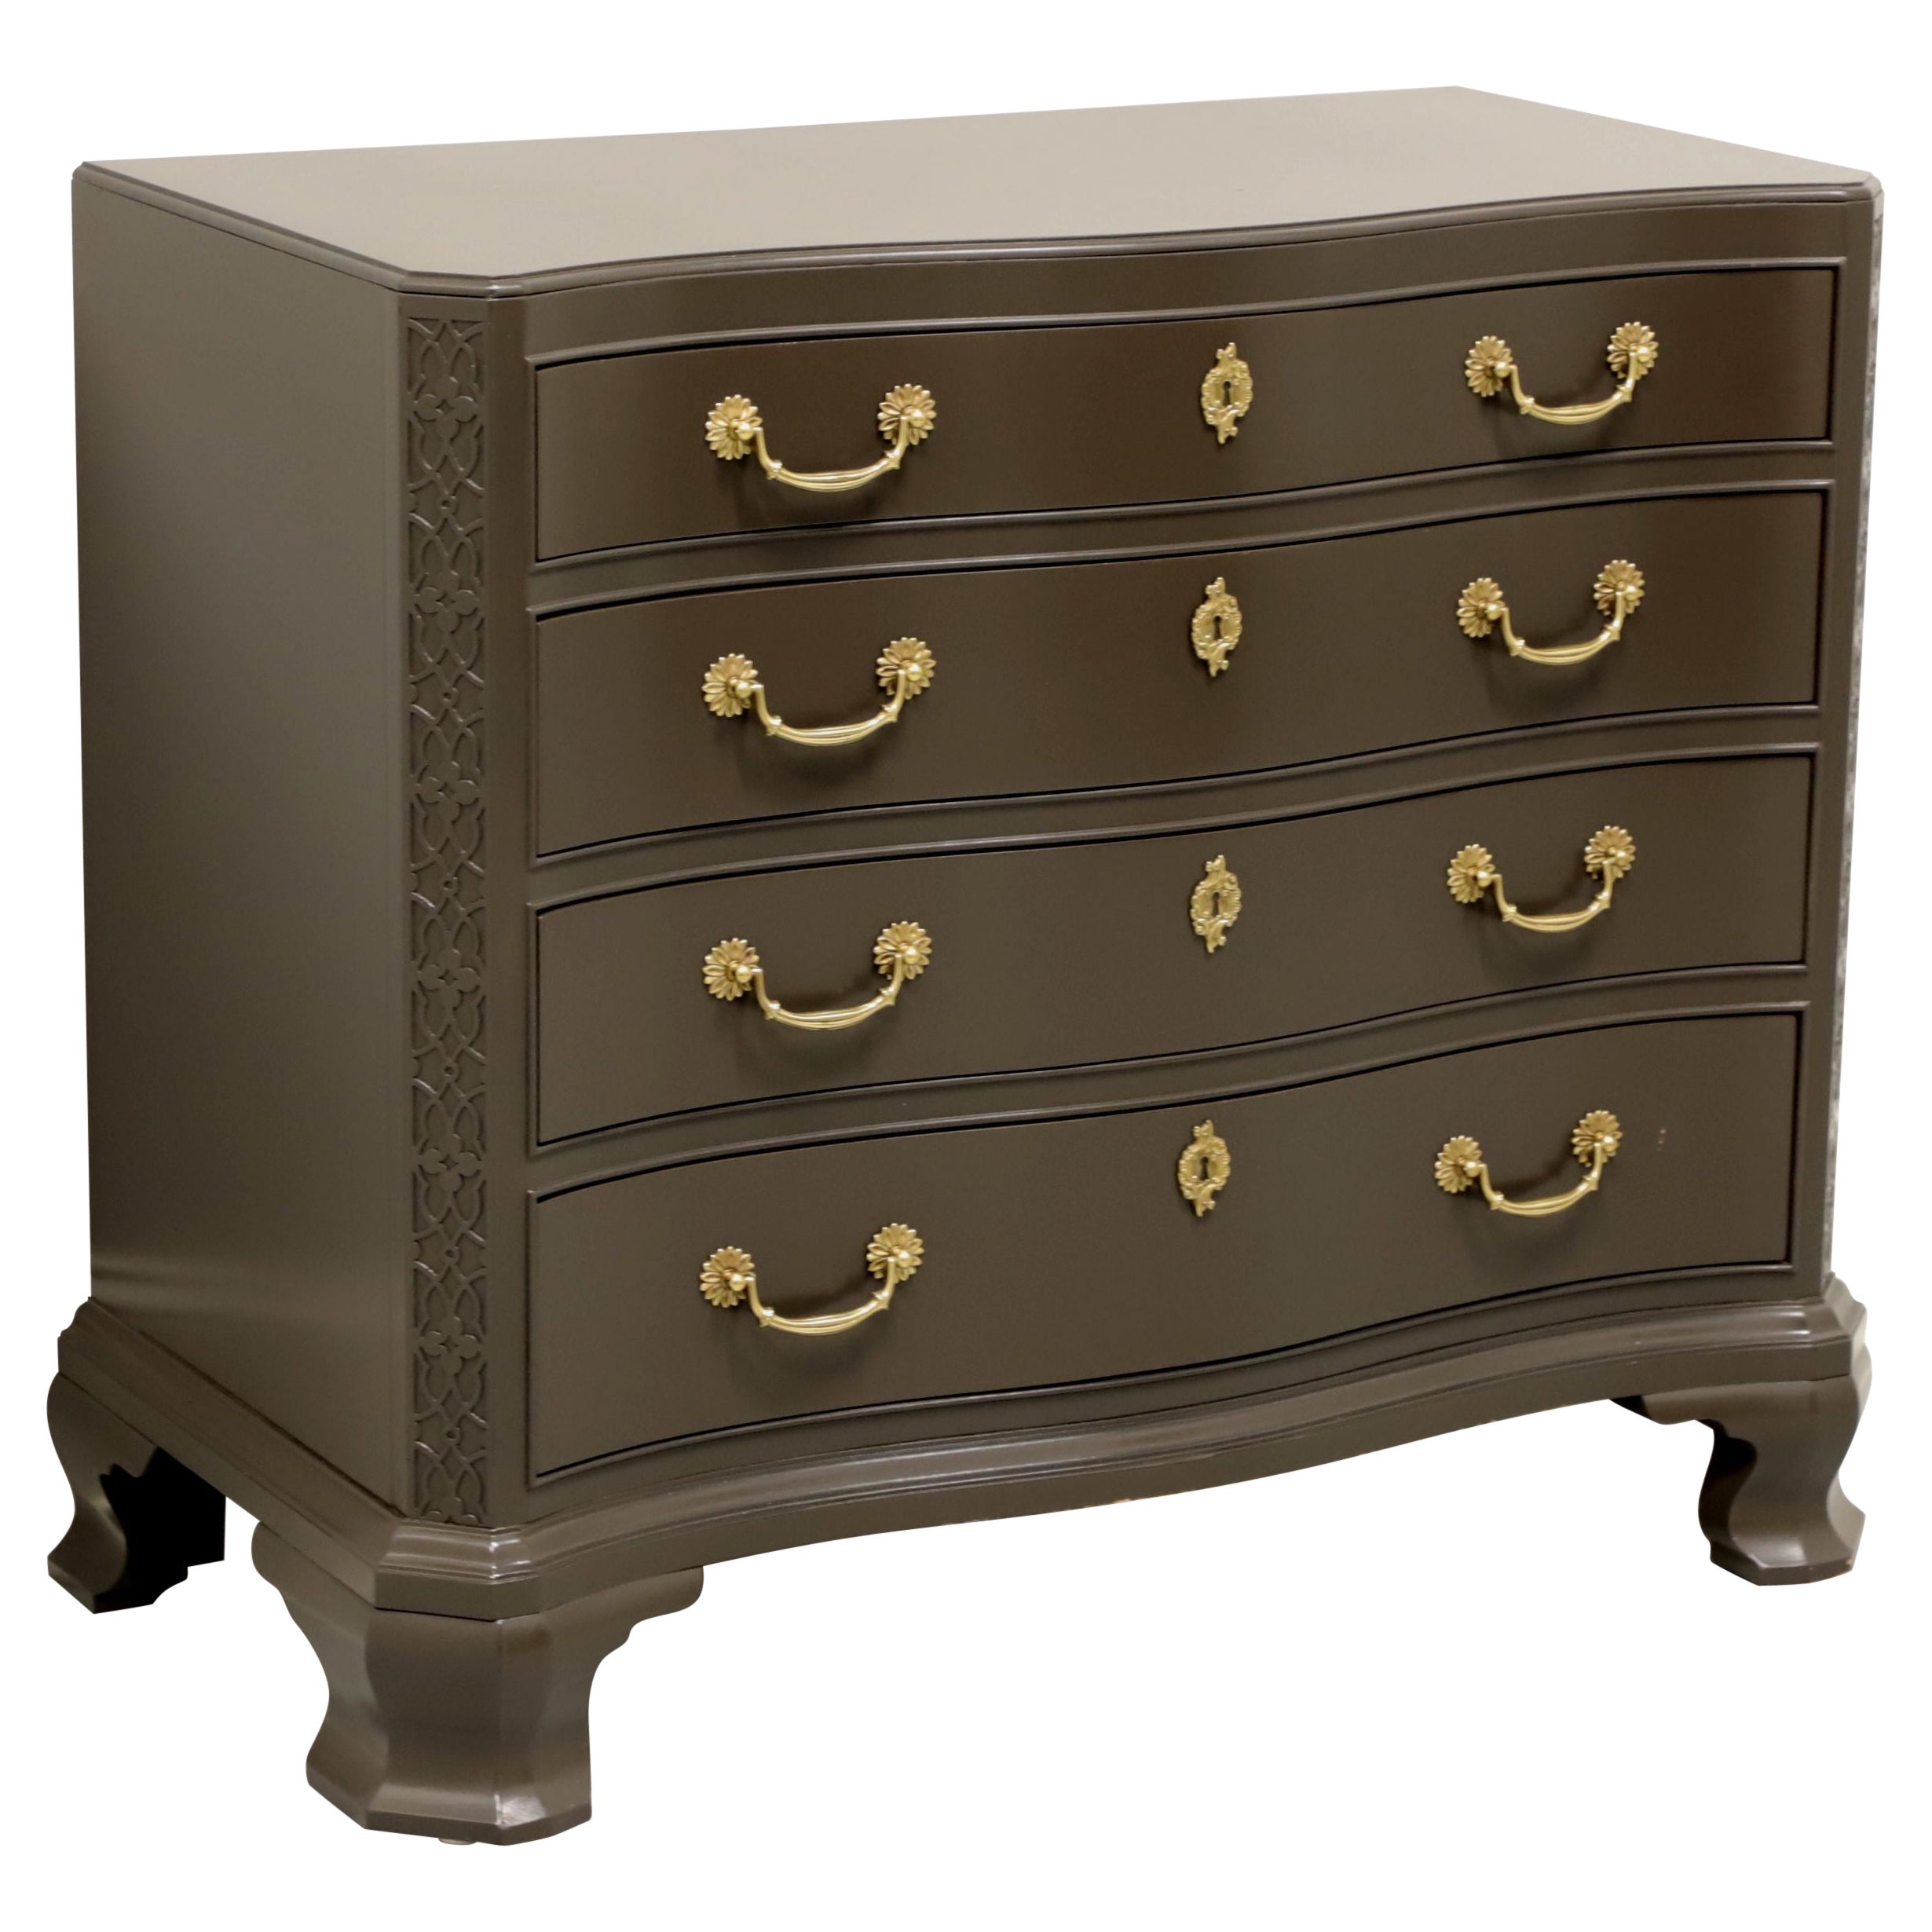 WHITE OF MEBANE Mahogany Chippendale Serpentine Gray Painted Bachelor Chest